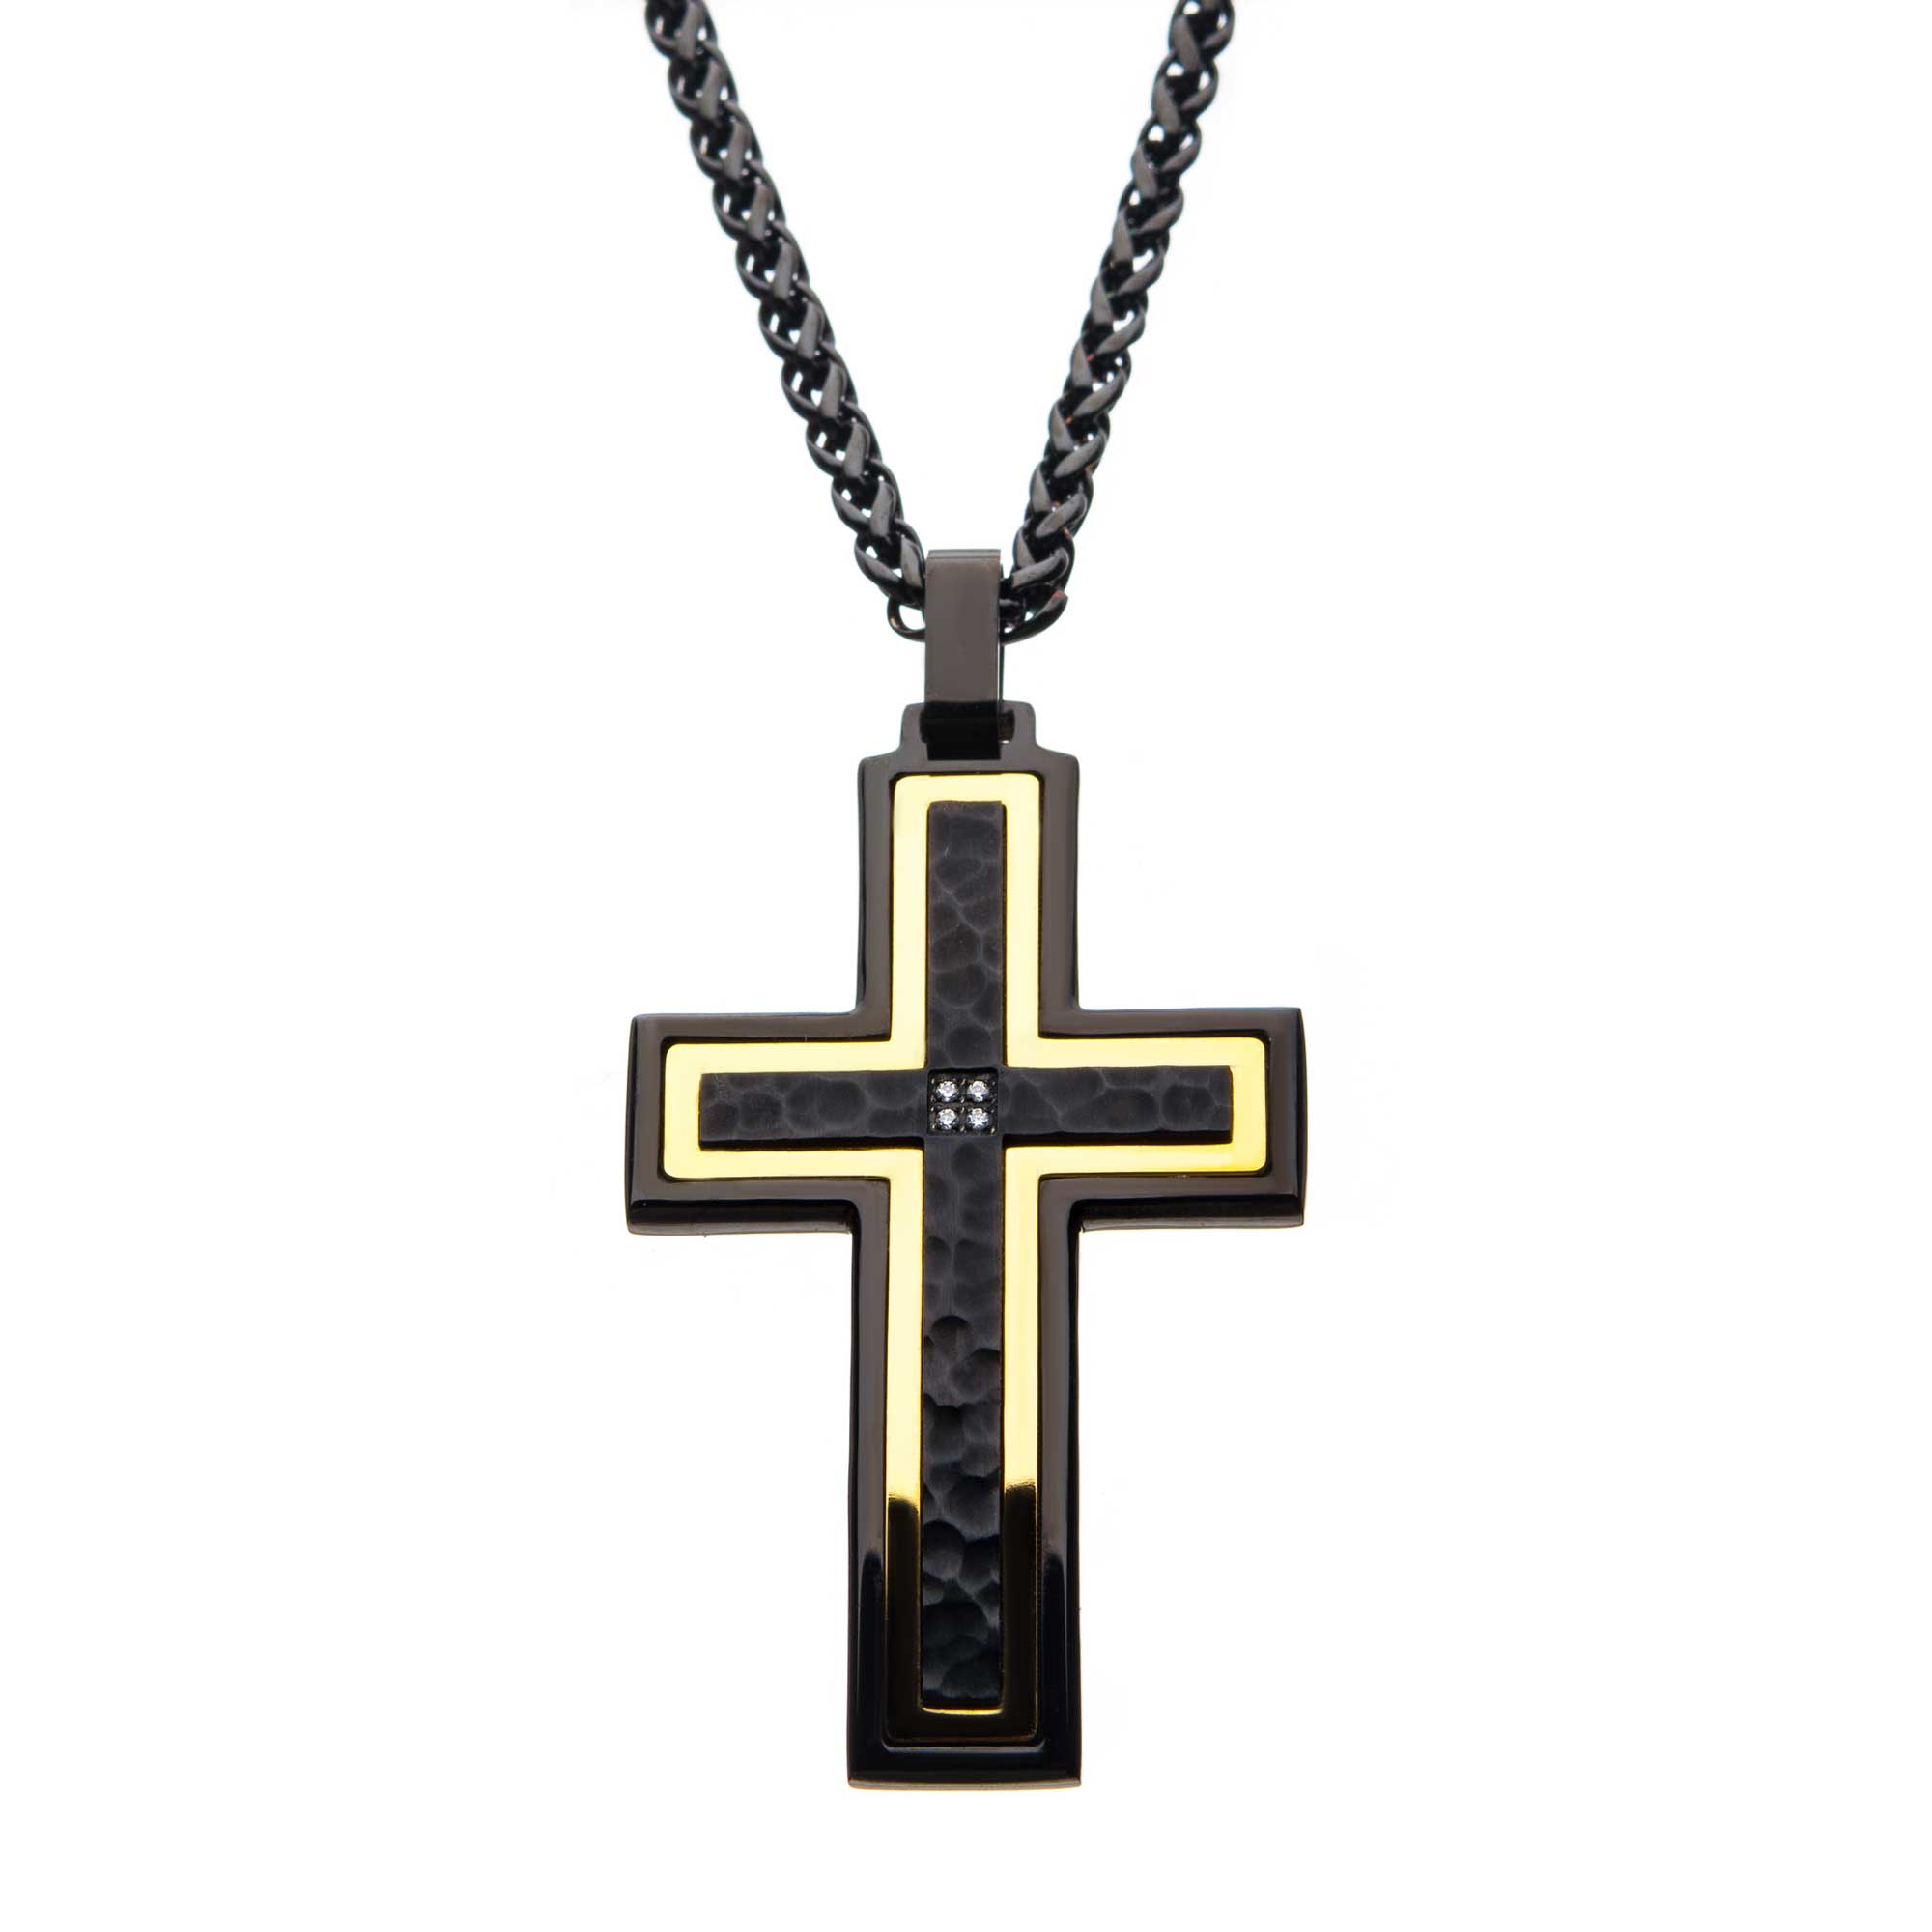 Hammered Black, Gold Plated Cross with CZ Stainless Steel Pendant Lewis Jewelers, Inc. Ansonia, CT